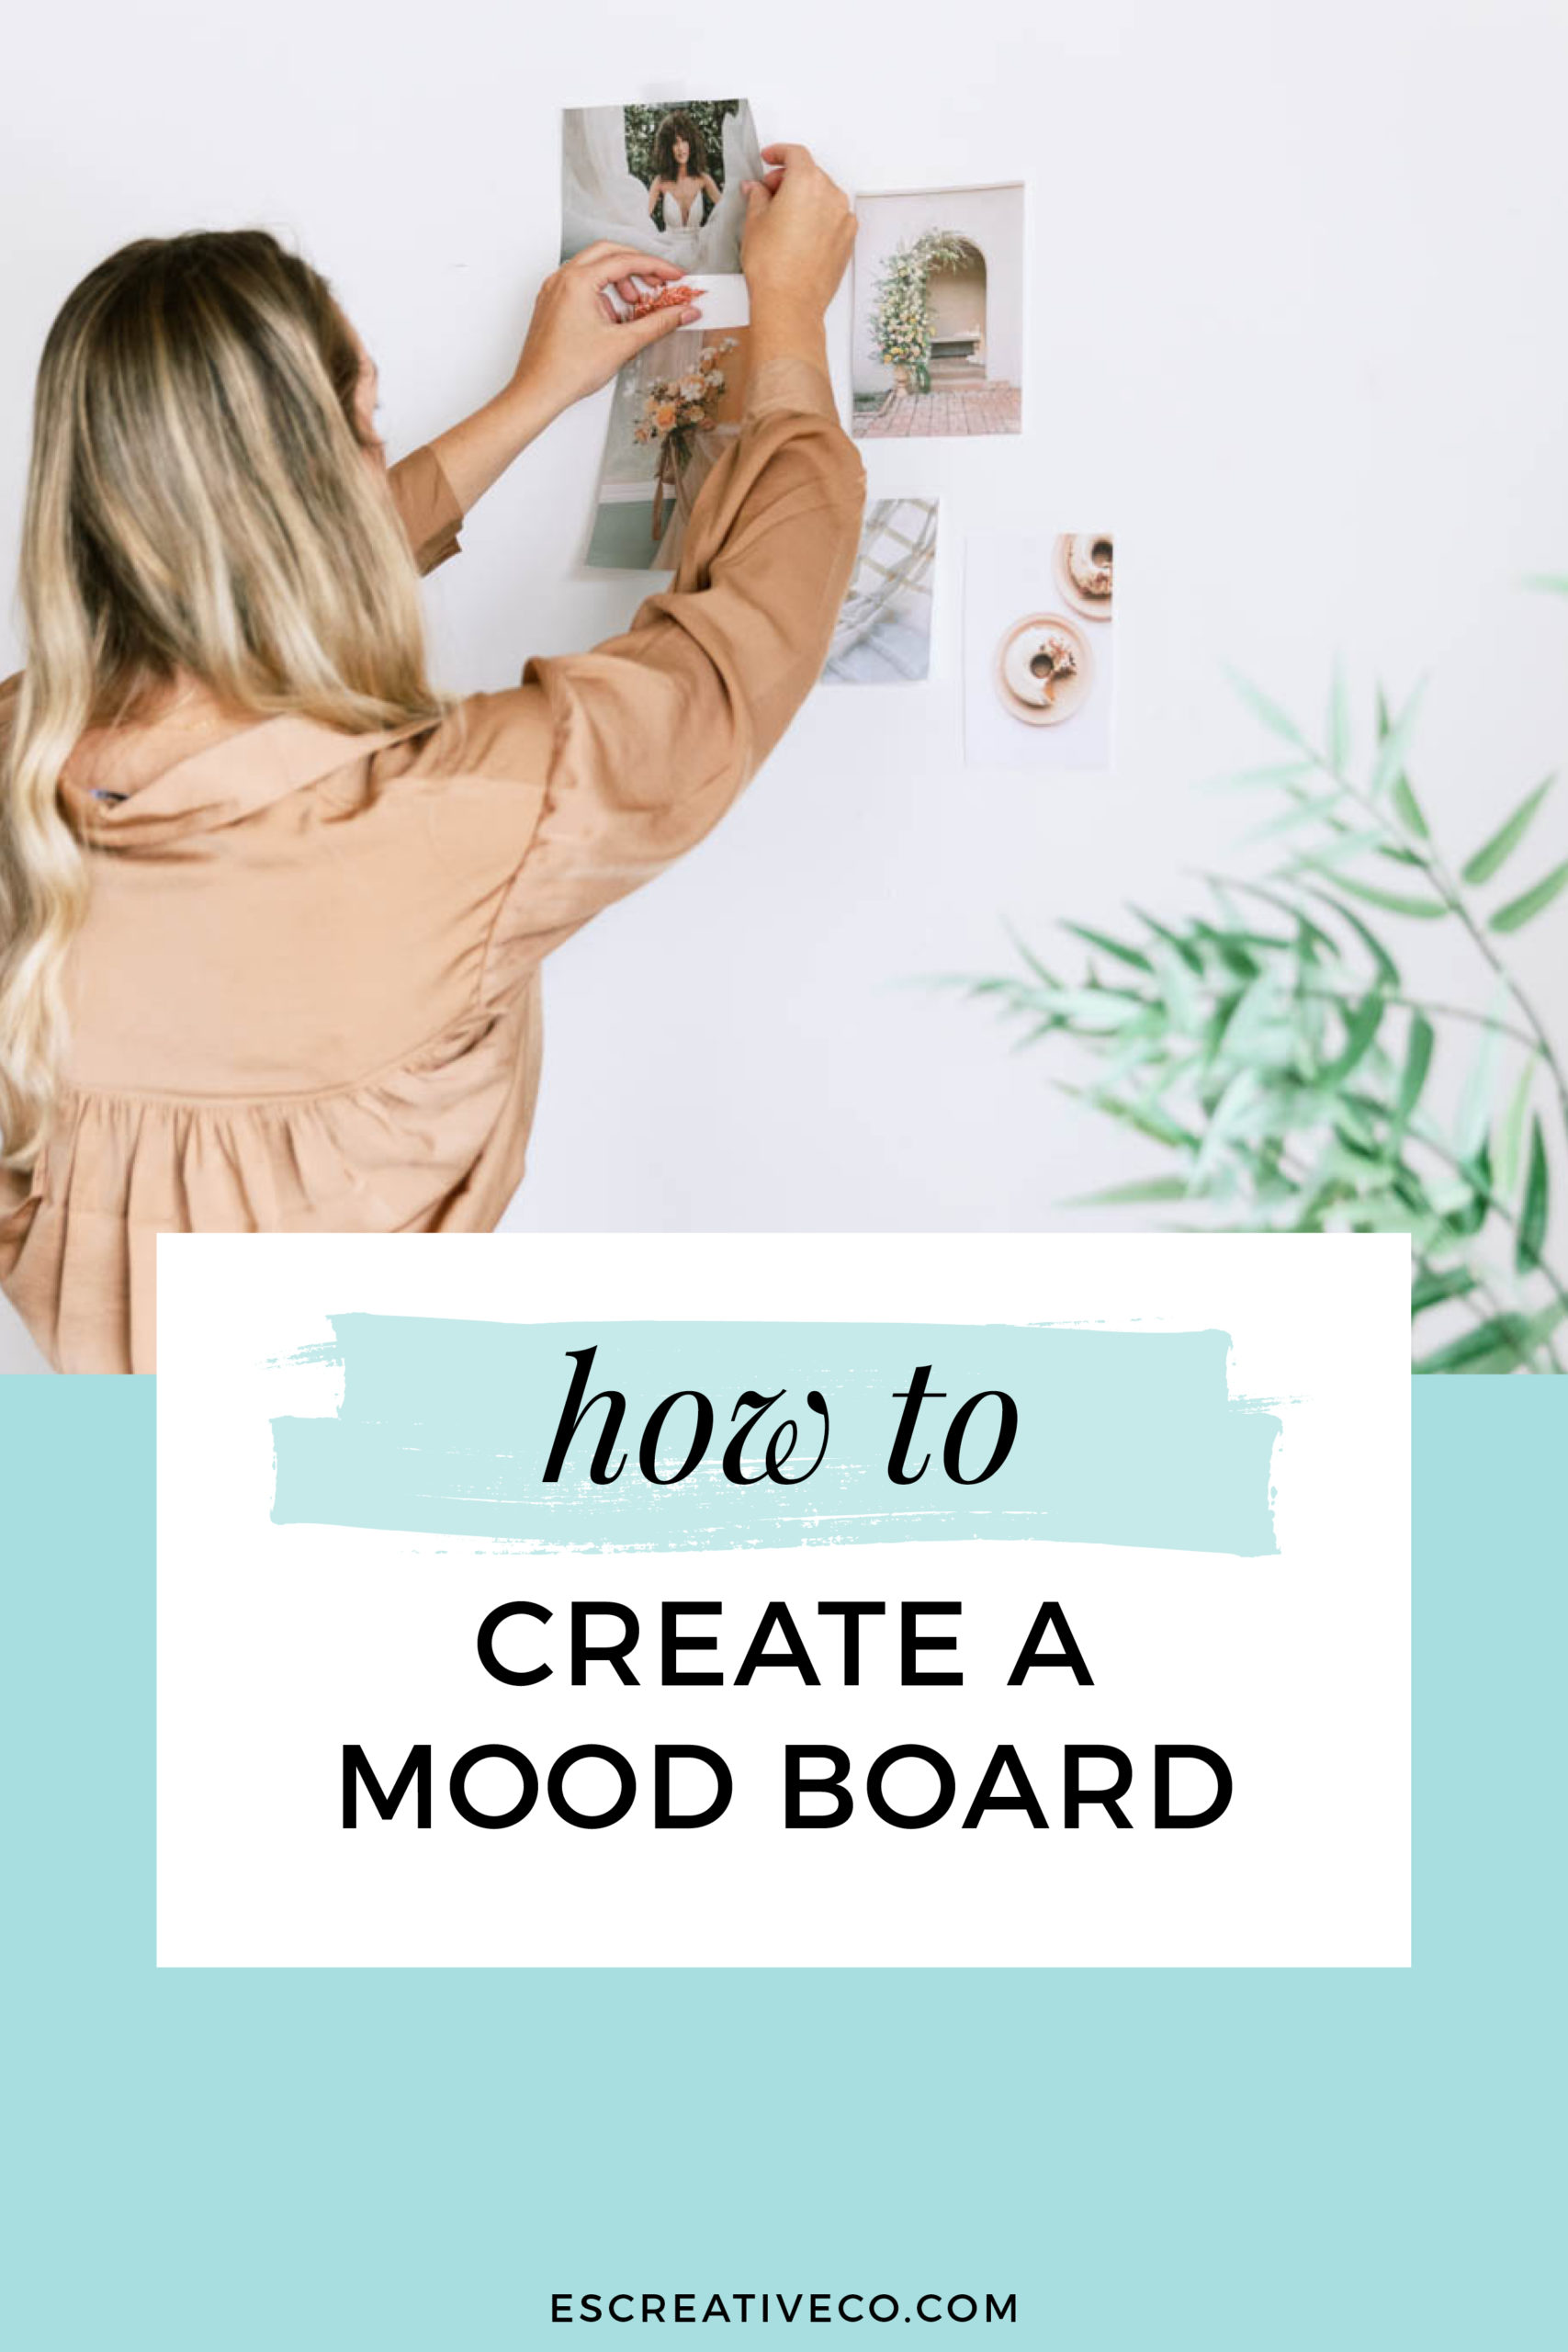 3 easy steps to creating a mood board - ES Creative Co